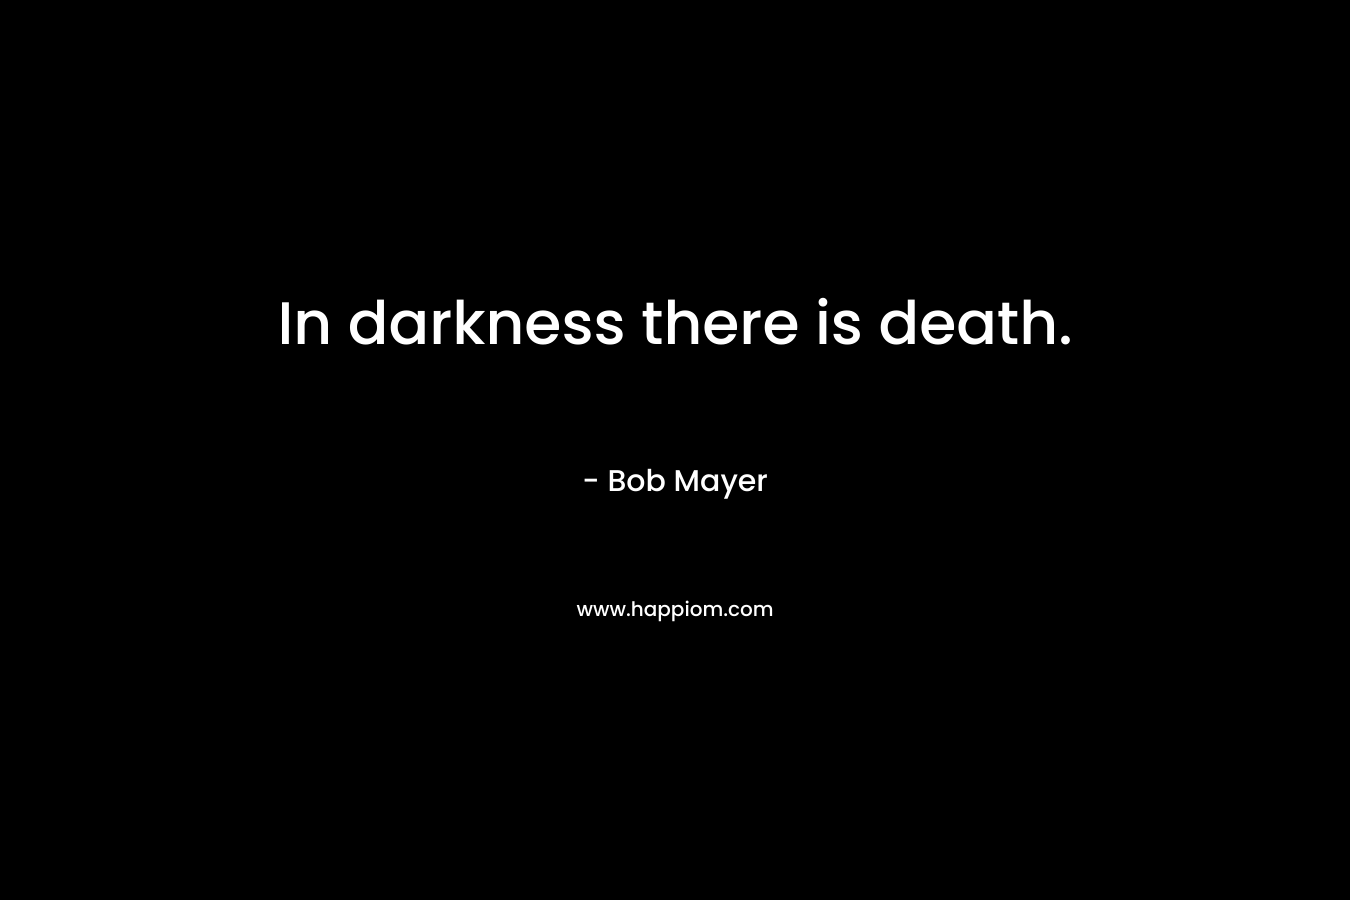 In darkness there is death. – Bob Mayer